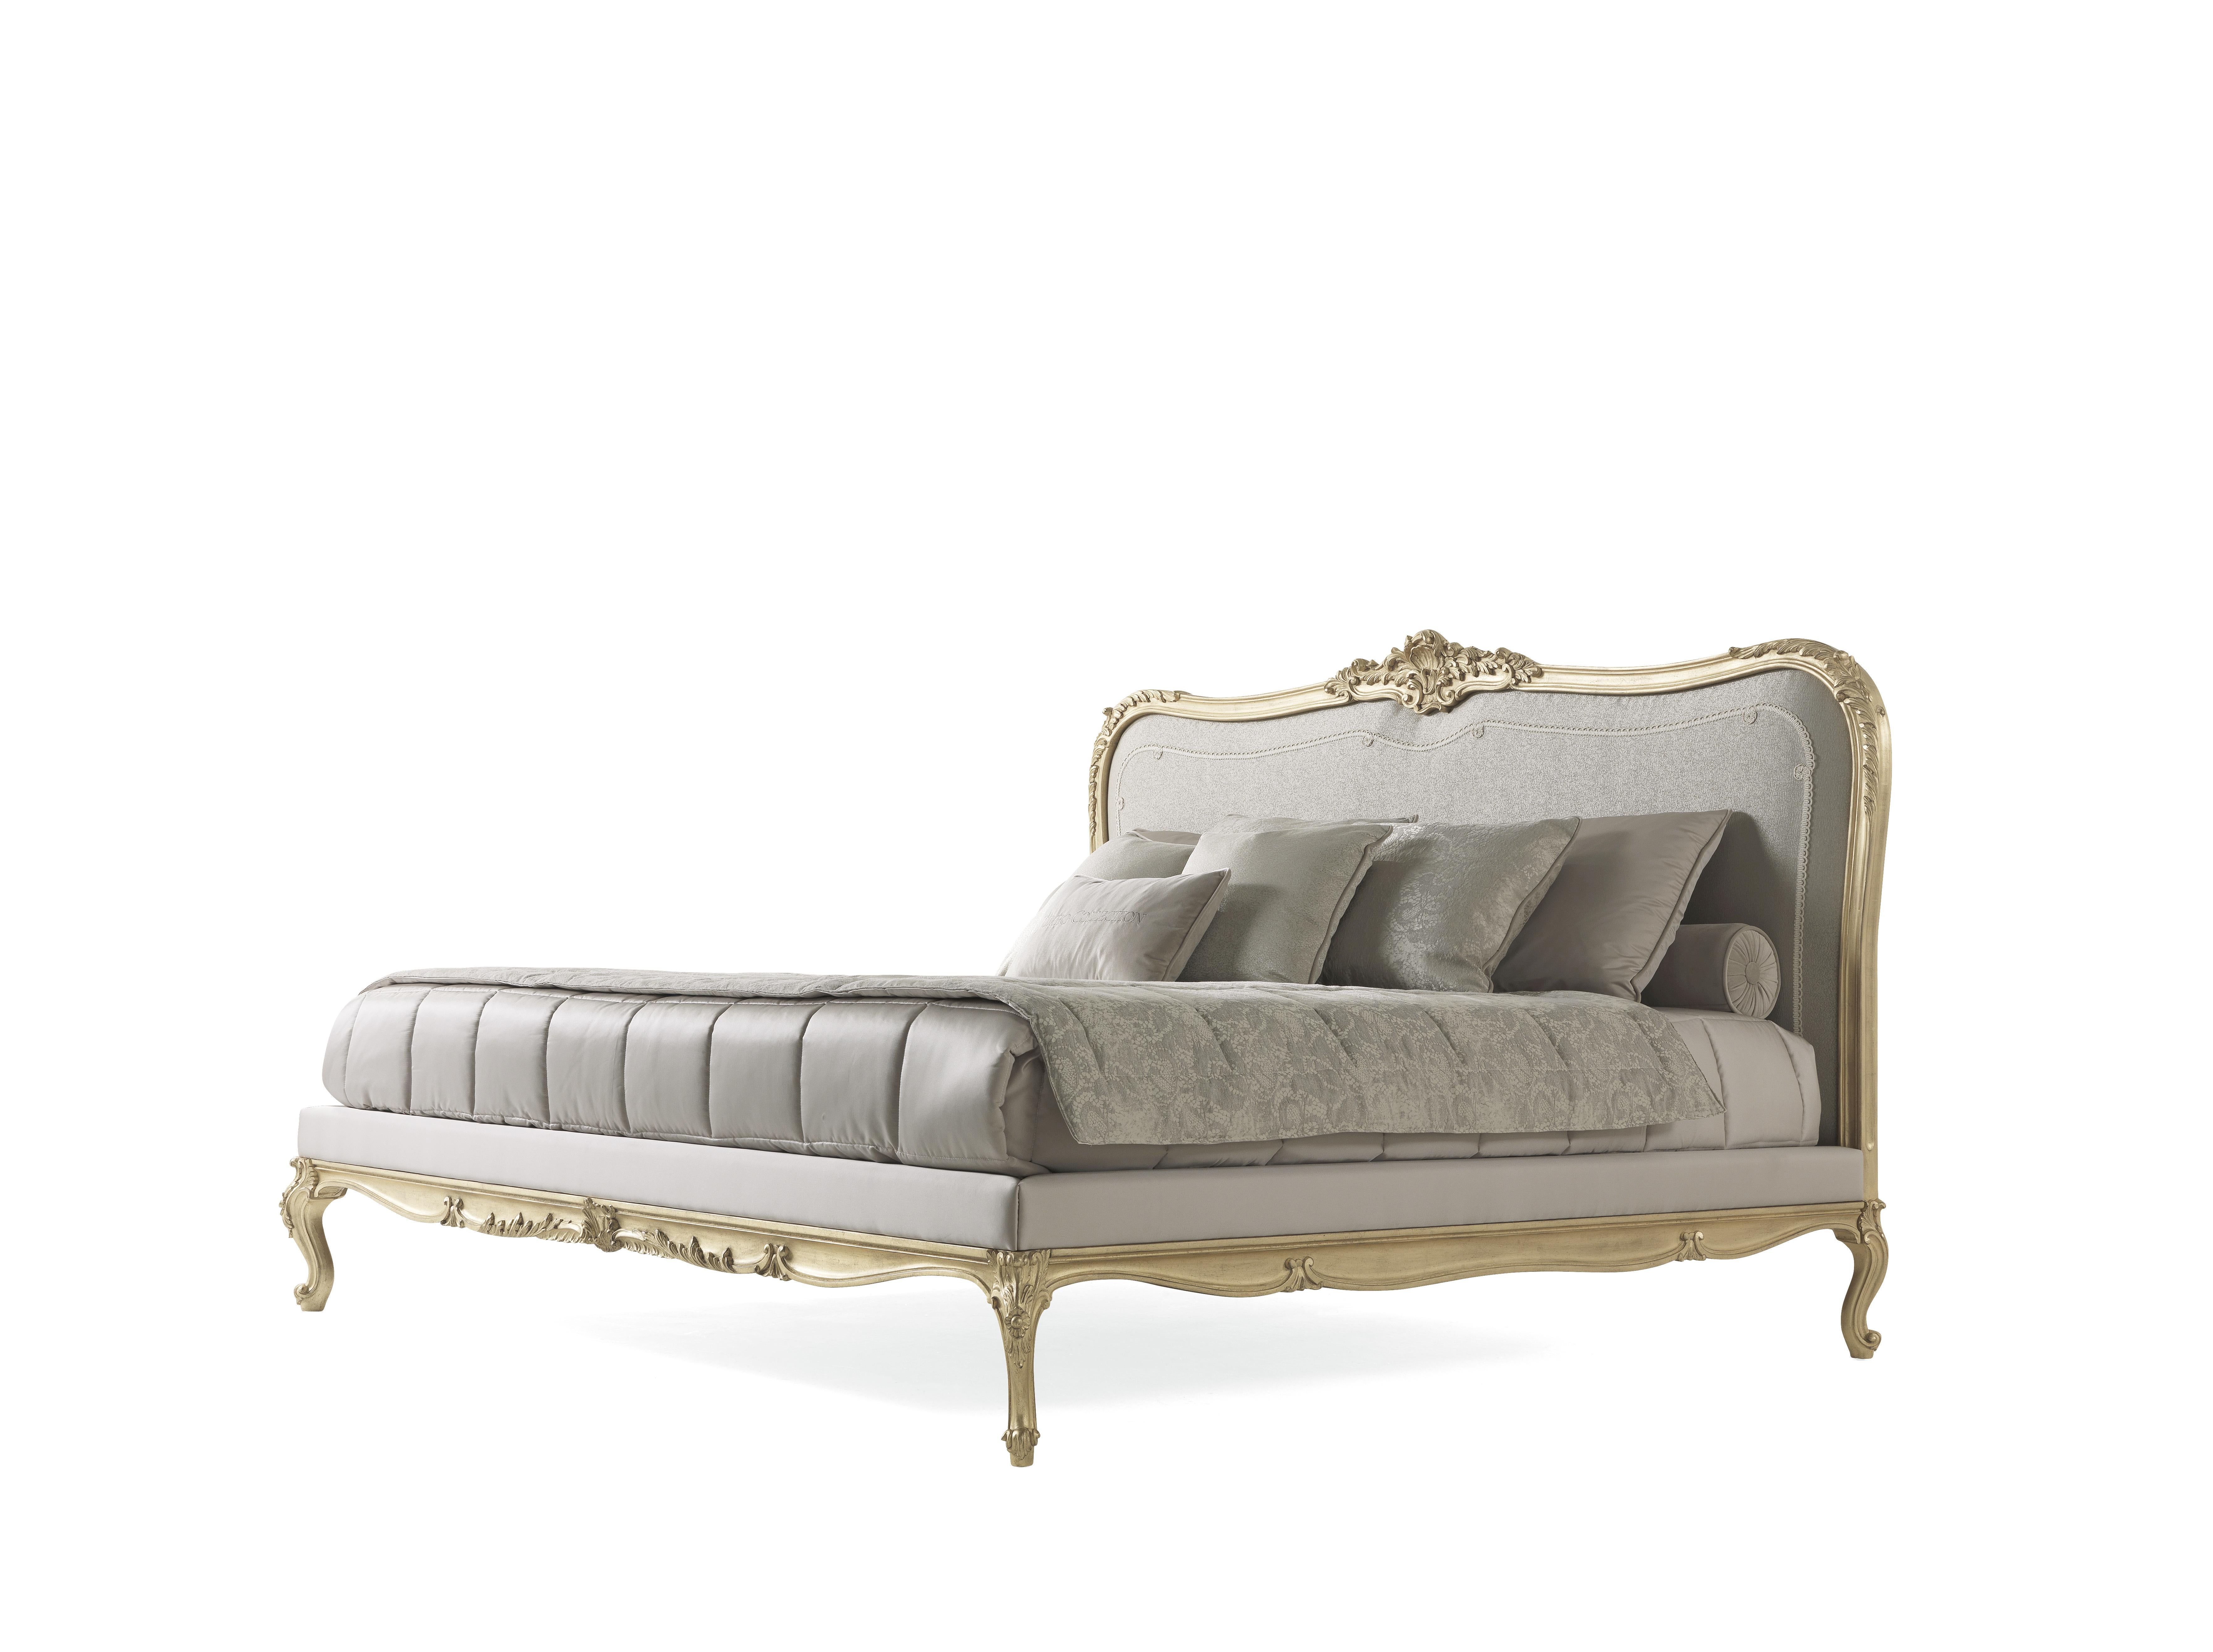 The perfect protagonist of settings with a regal and luxurious style, the Étamine bed grabs the attention with its timeless charm, expression of a refined taste, and sophisticated aesthetic. Characterized by a hand-carved headboard with patinated